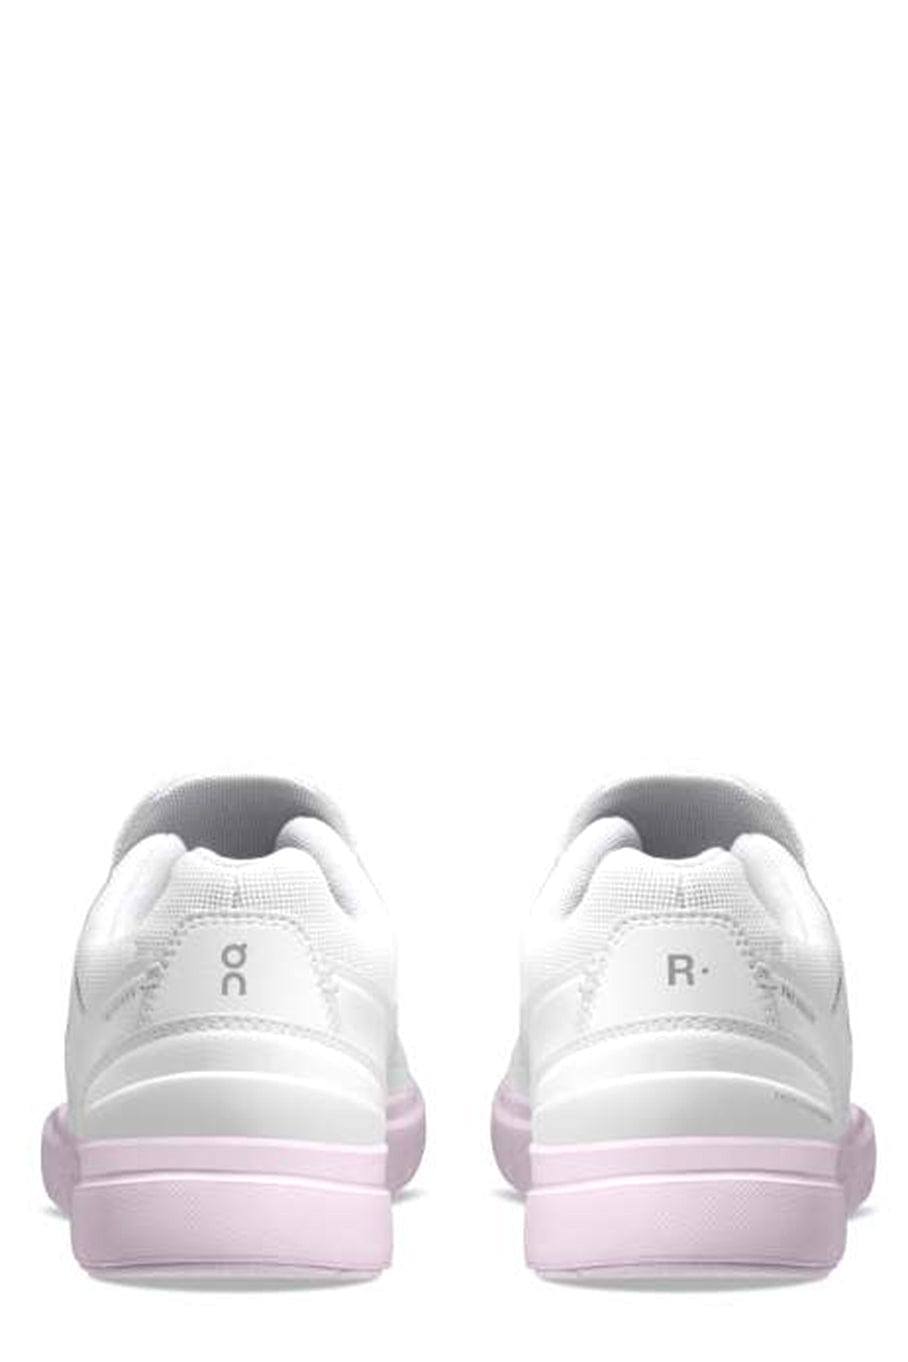 ON RUNNING-The Roger Advantage Sneaker - White Lily-